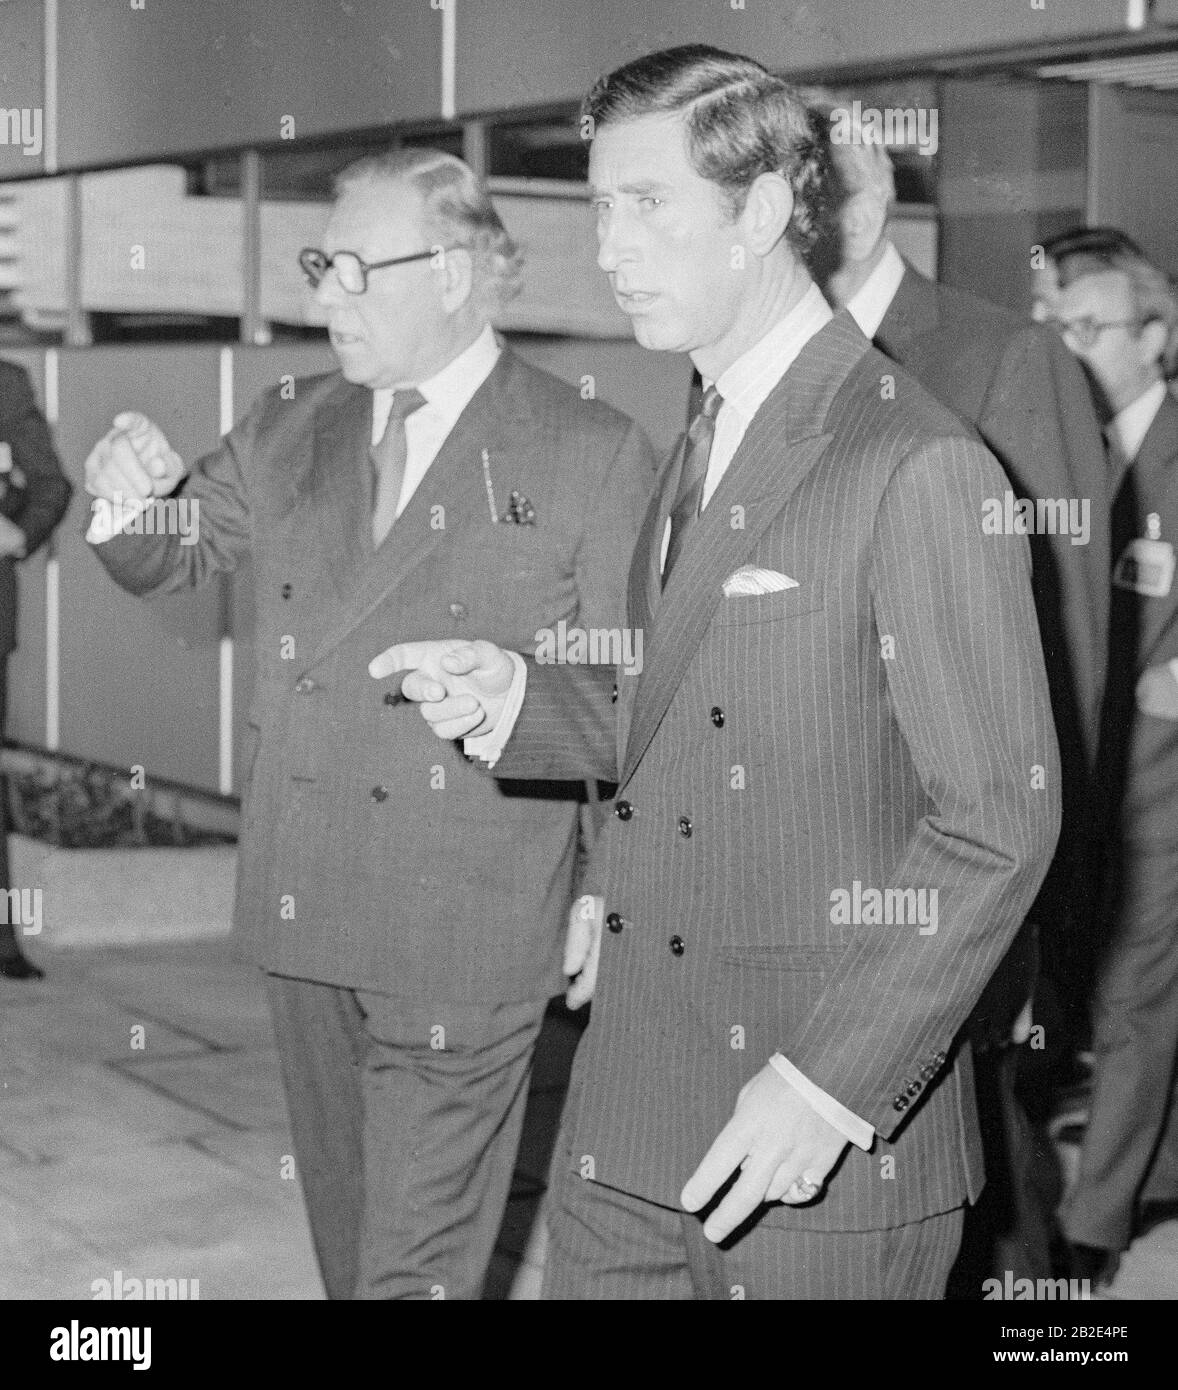 Prince Charles Prince of Wales leaving London's Heathrow Airport escorted by British Airways chairman Lord King and BAA PLC chairman Sir John Egan in 1988. Stock Photo